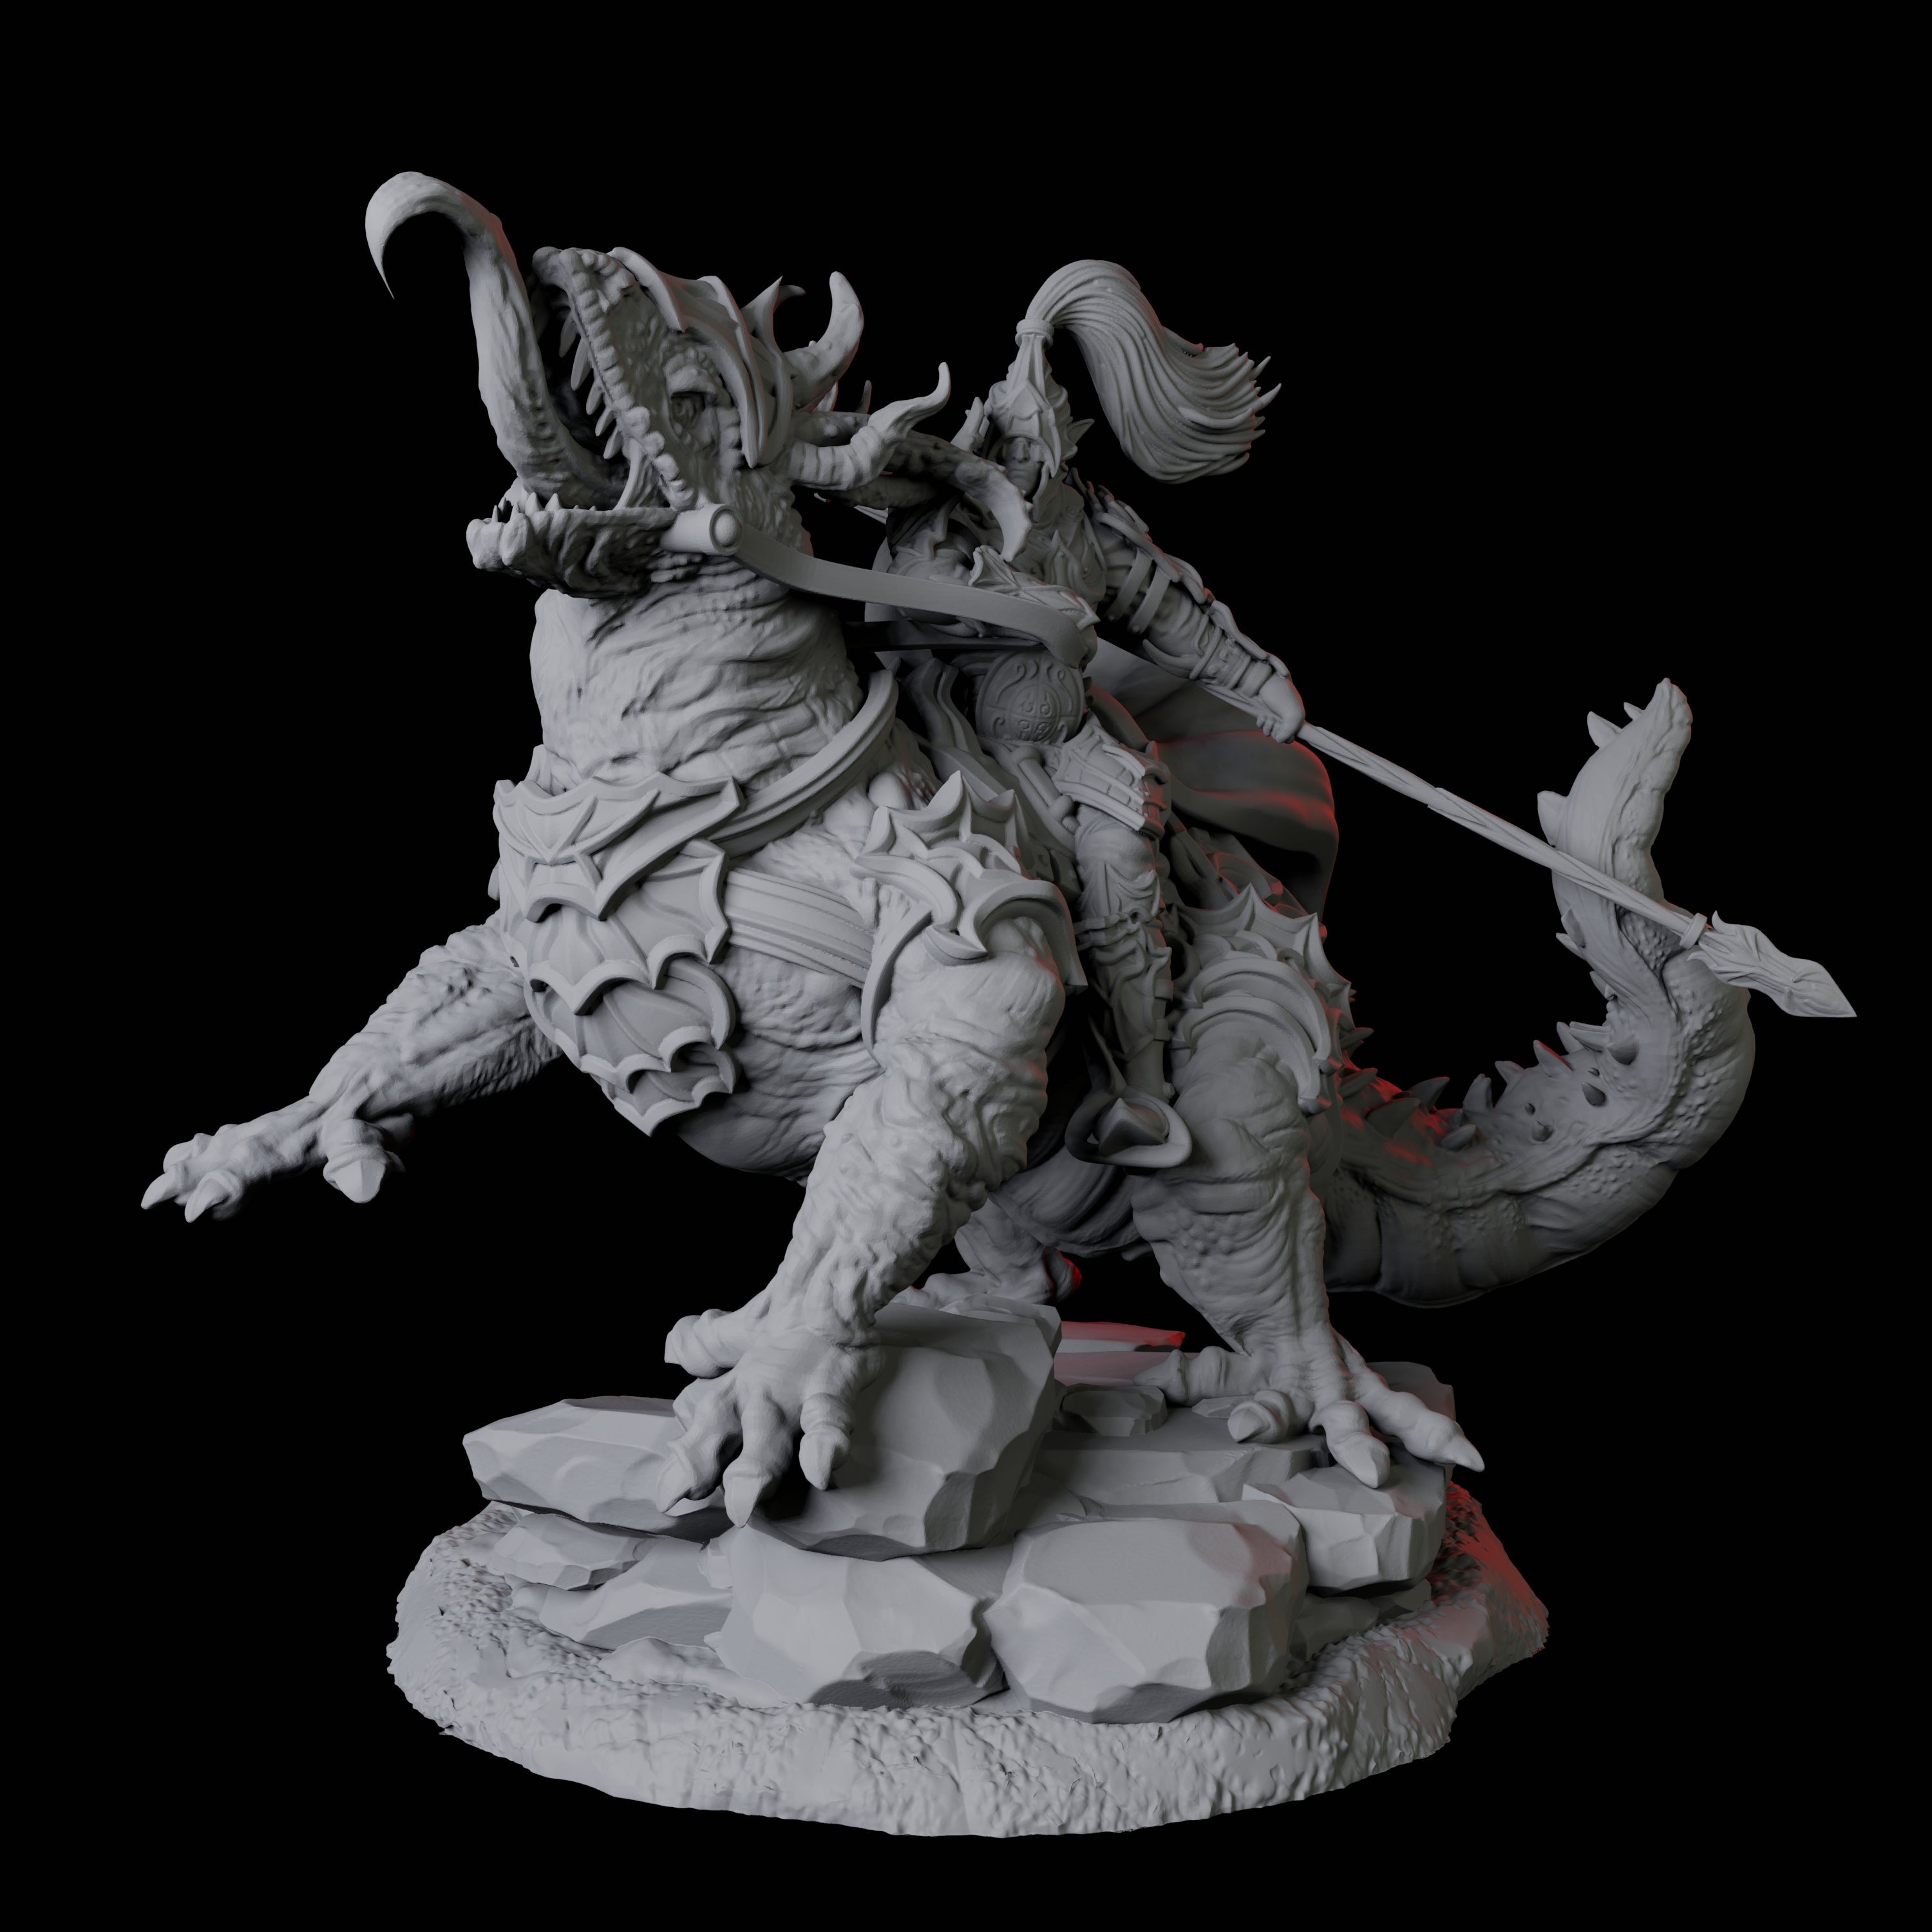 Four Fighters mounted on Giant Lizards Miniature for Dungeons and Dragons, Pathfinder or other TTRPGs